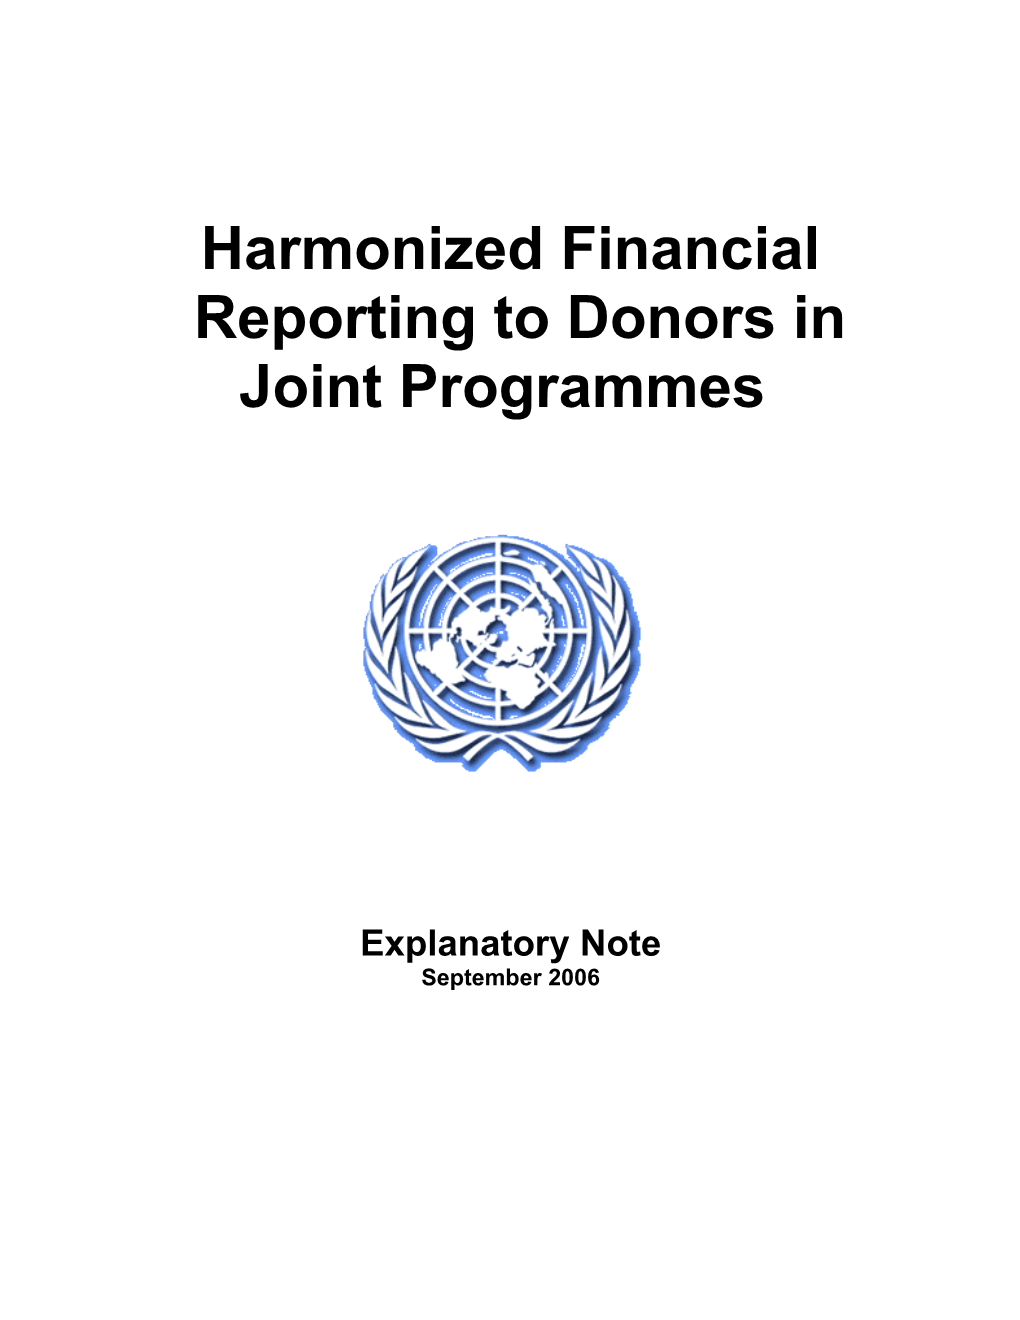 Harmonized Financial Reporting to Donors In